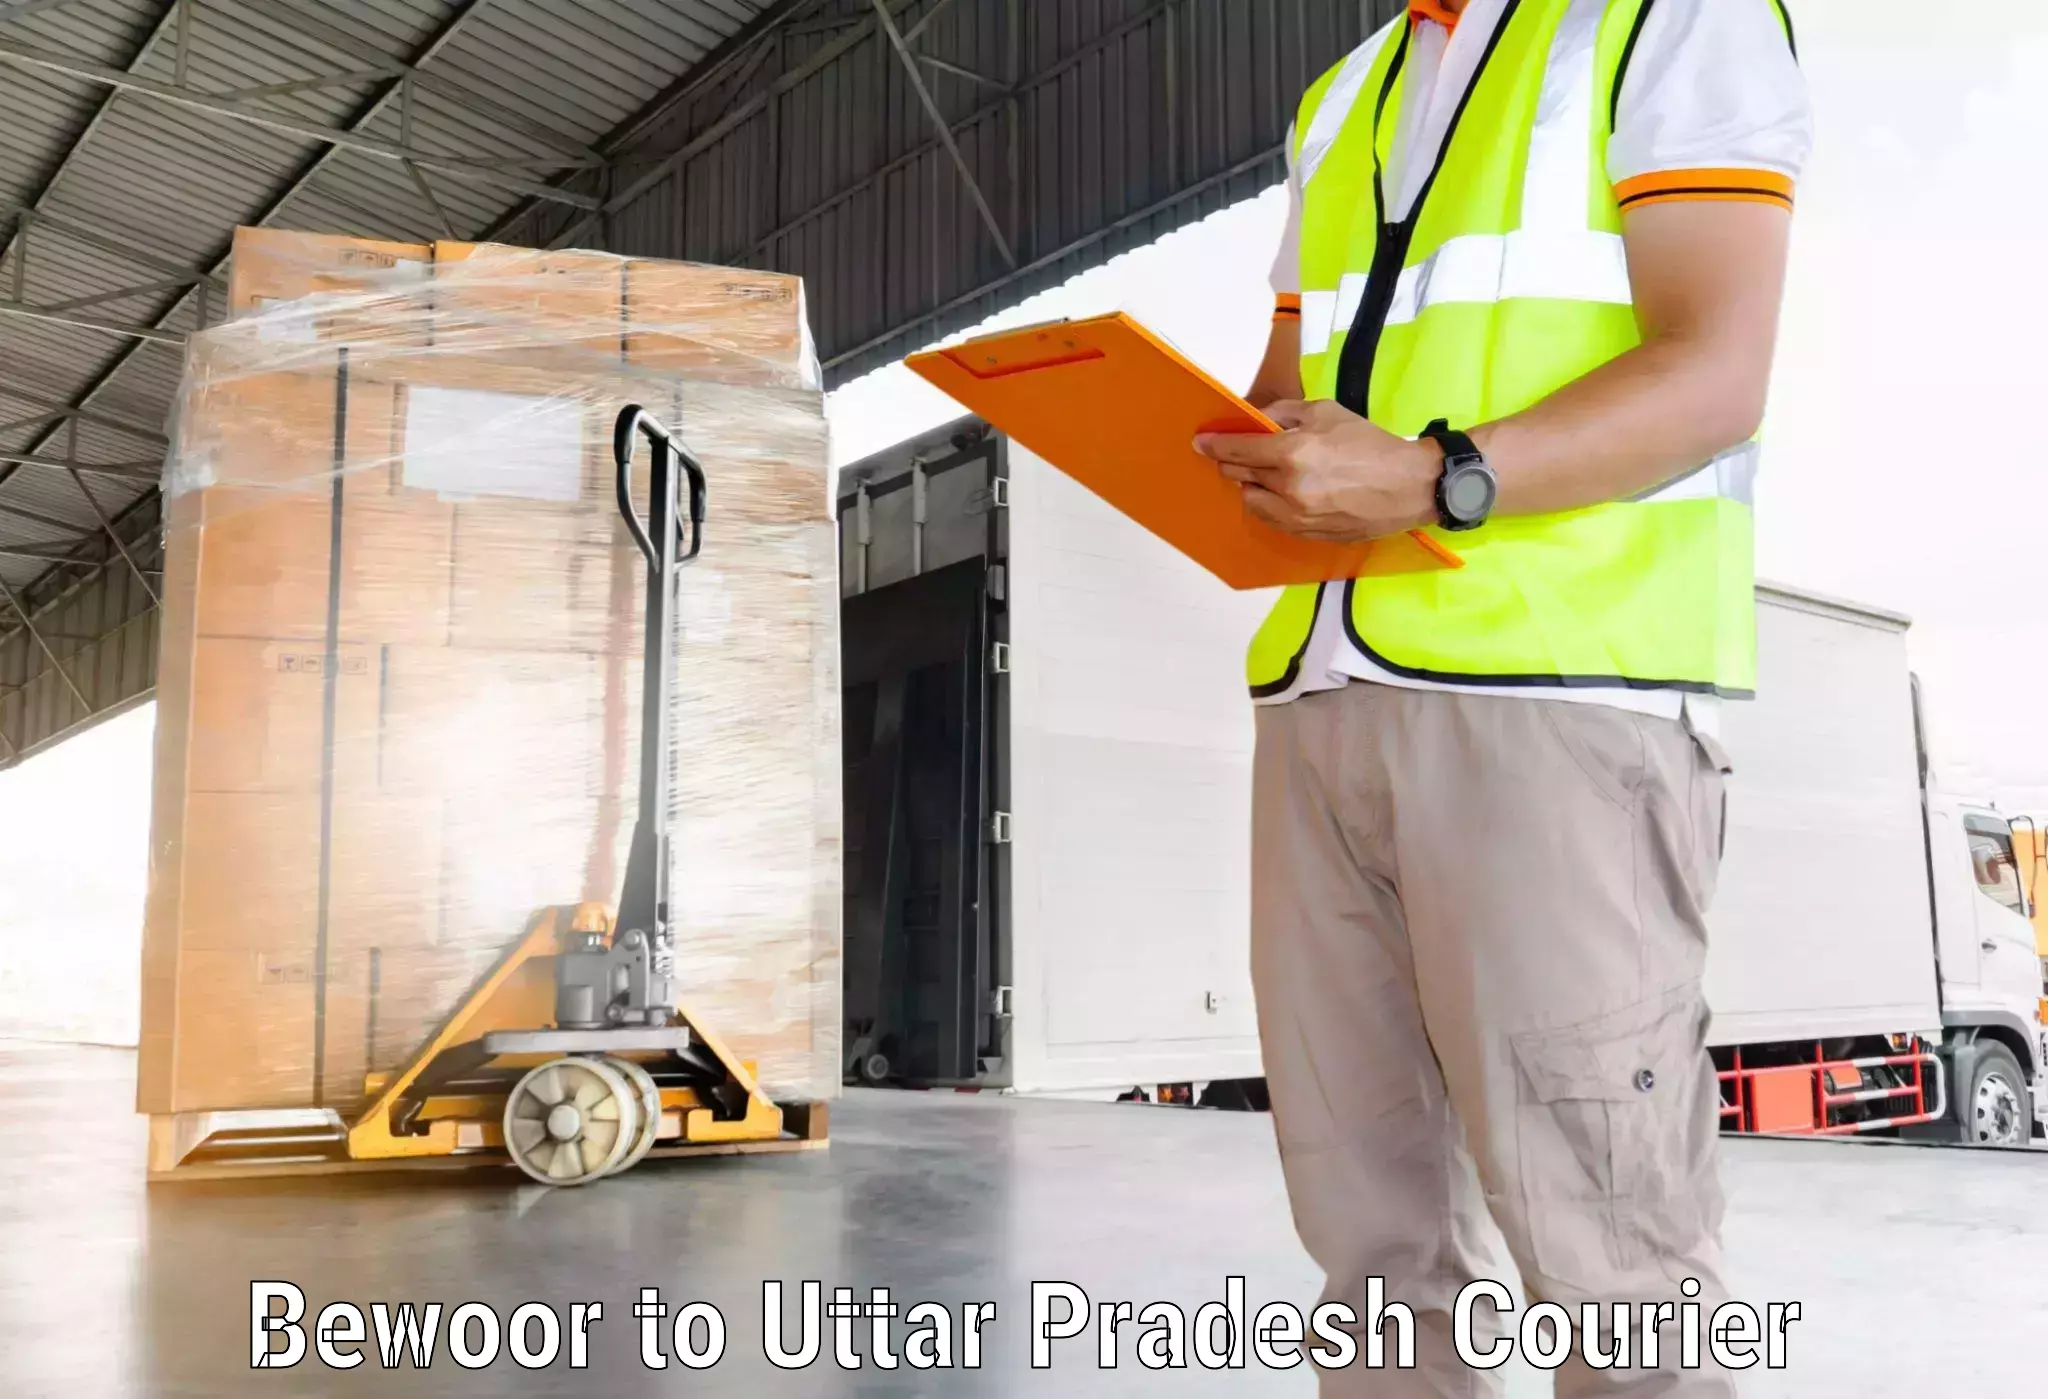 Residential courier service Bewoor to Fatehabad Agra